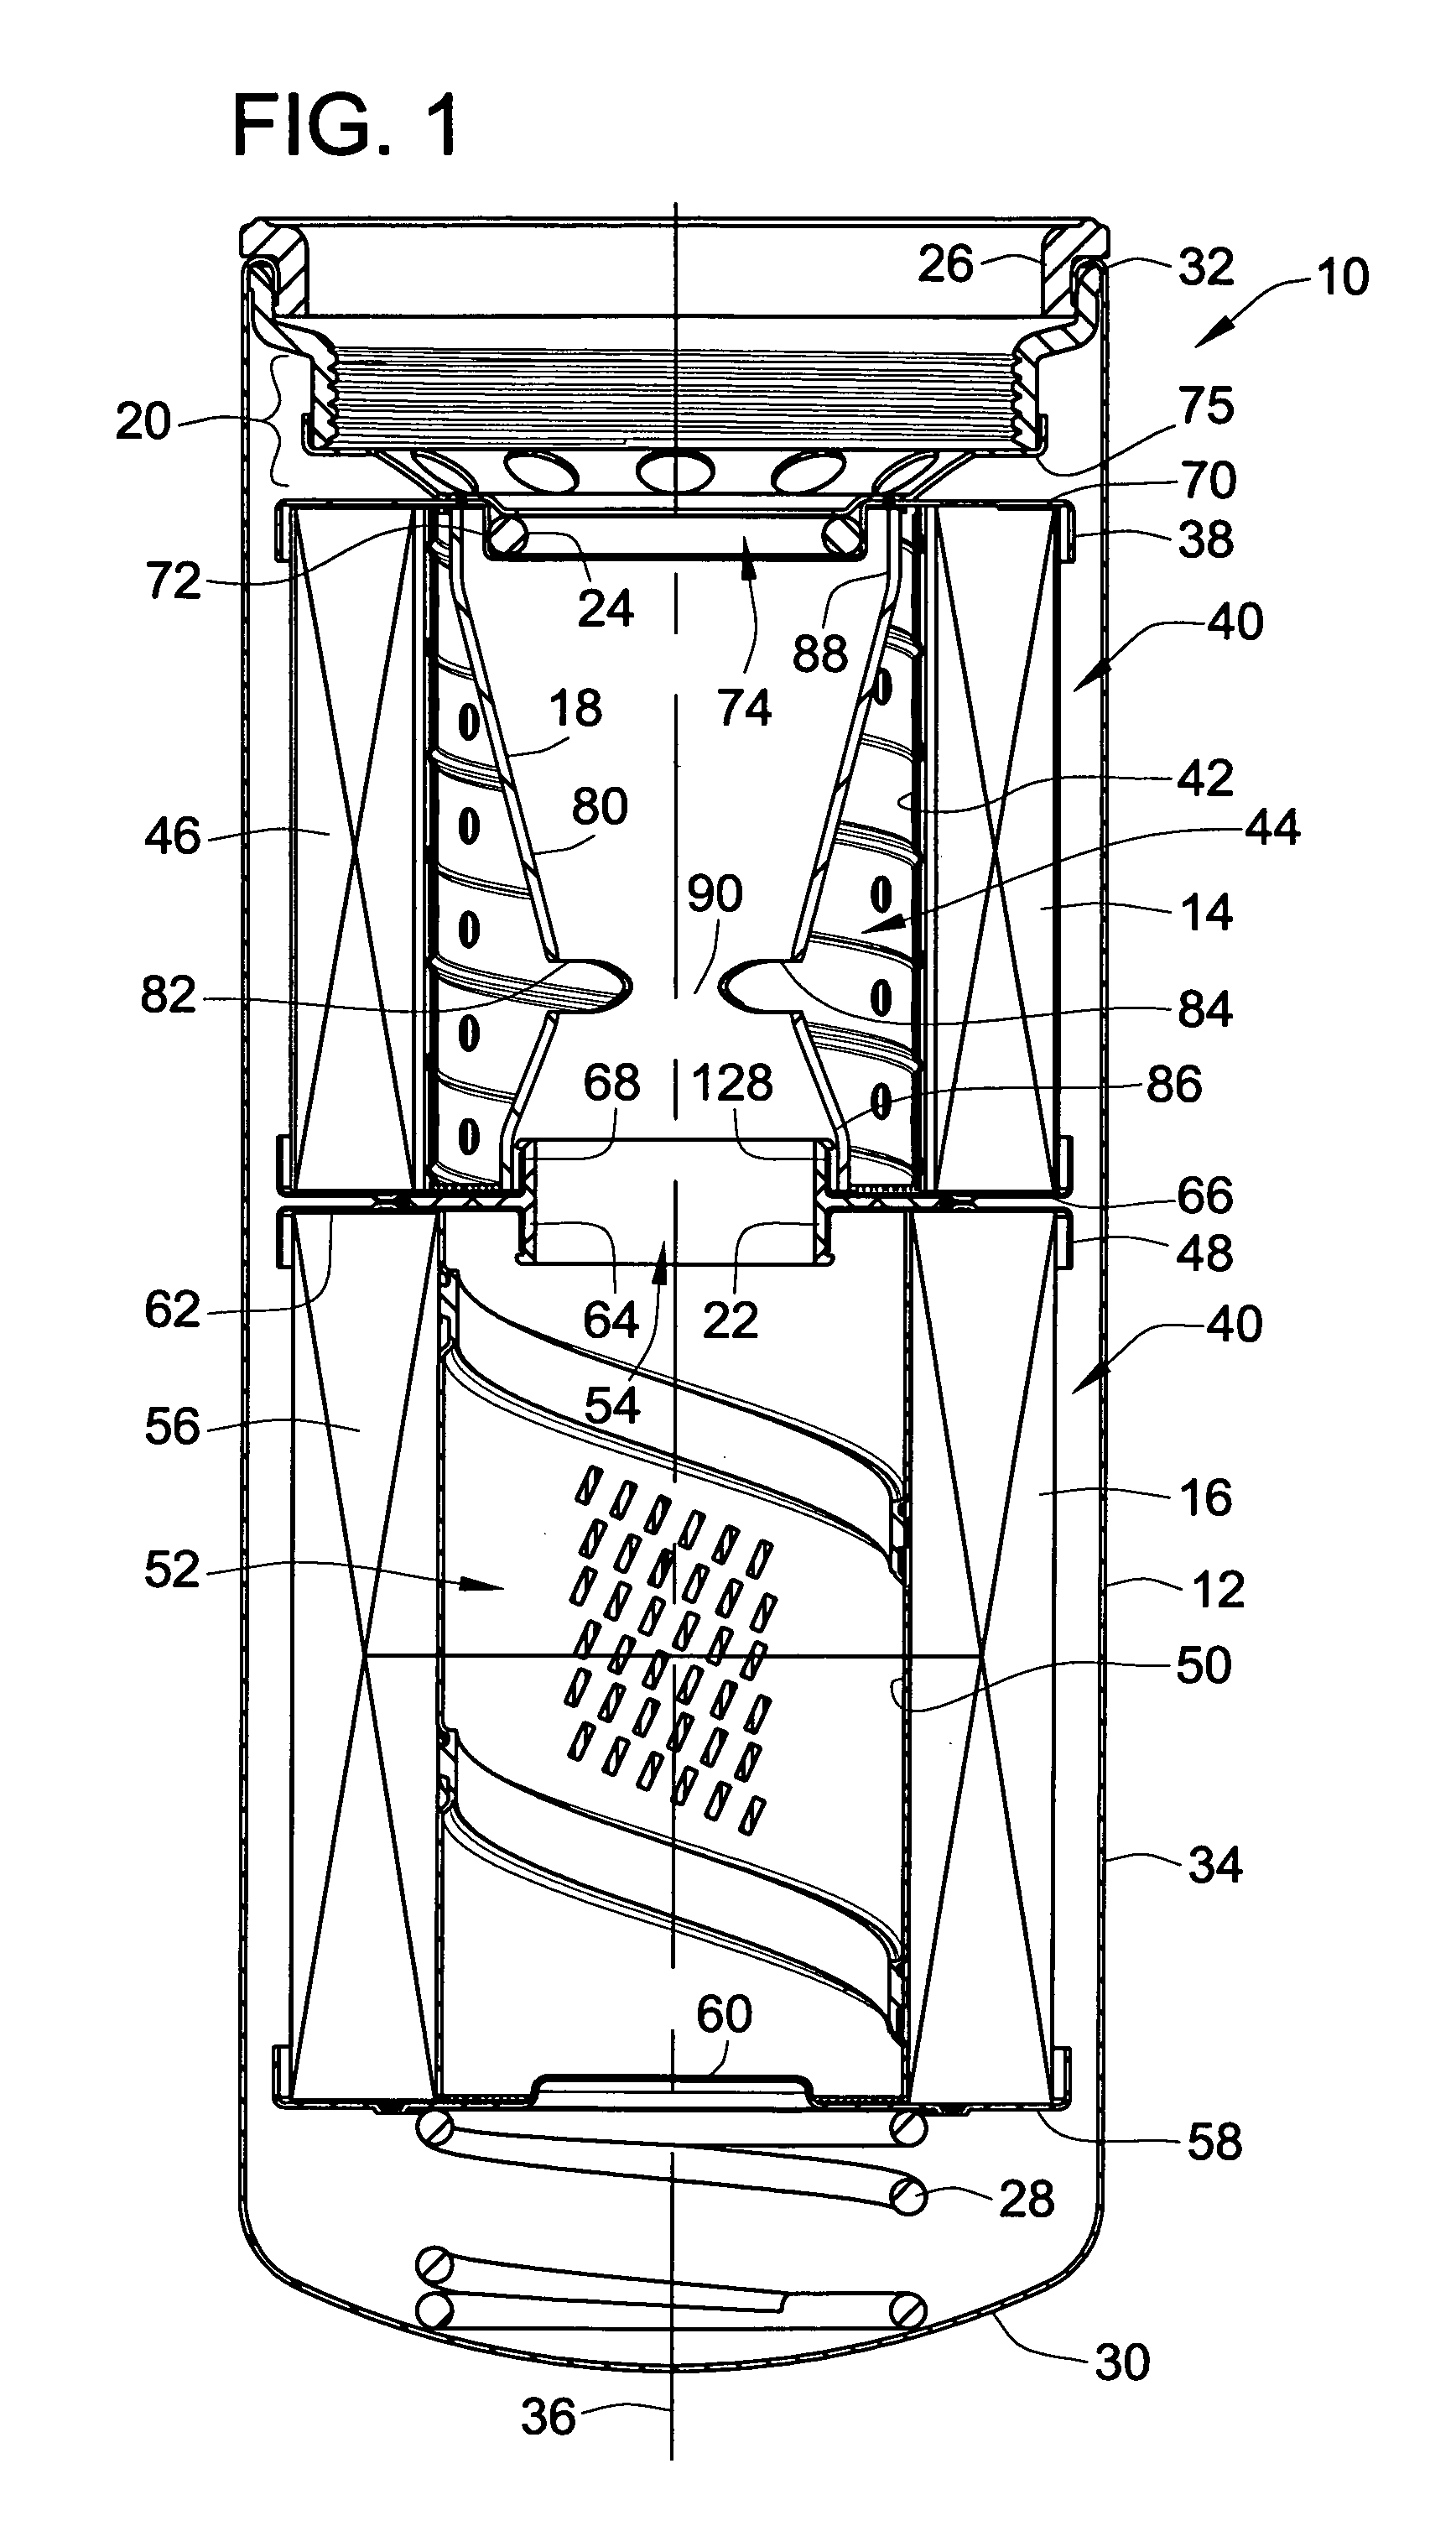 Fluid filtration apparatus and method